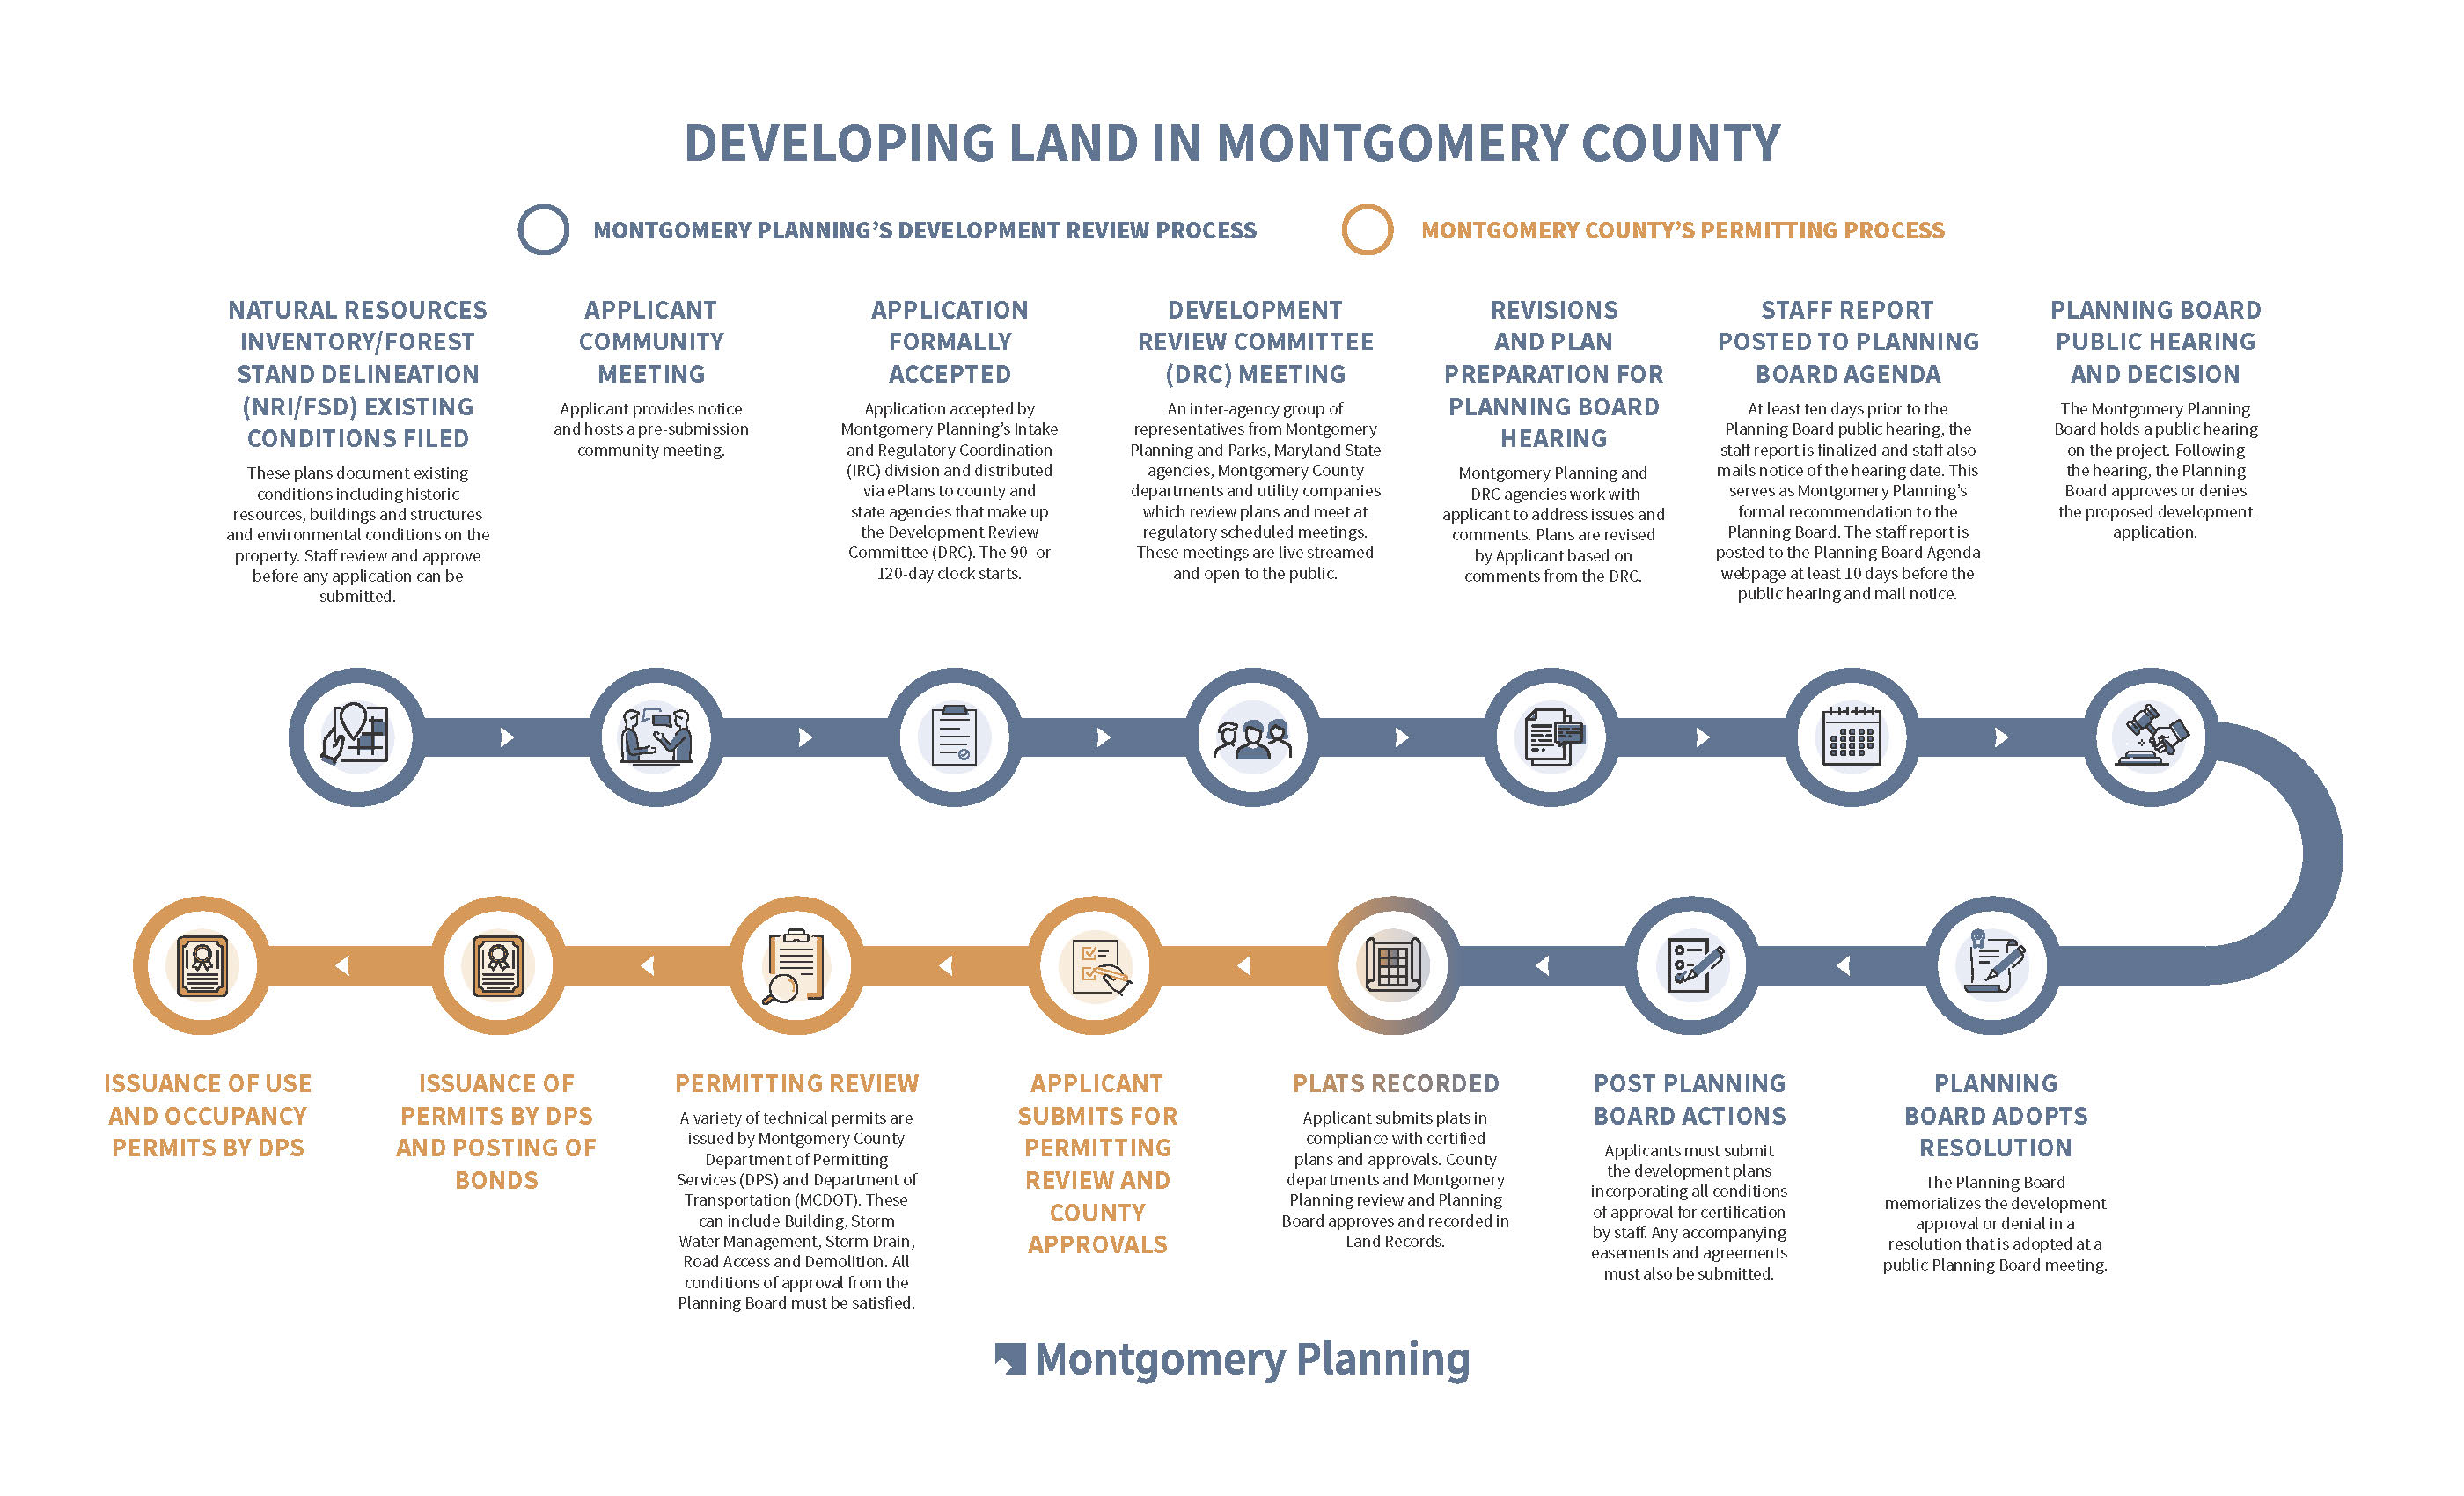 Steps to Developing Land in Montgomery County